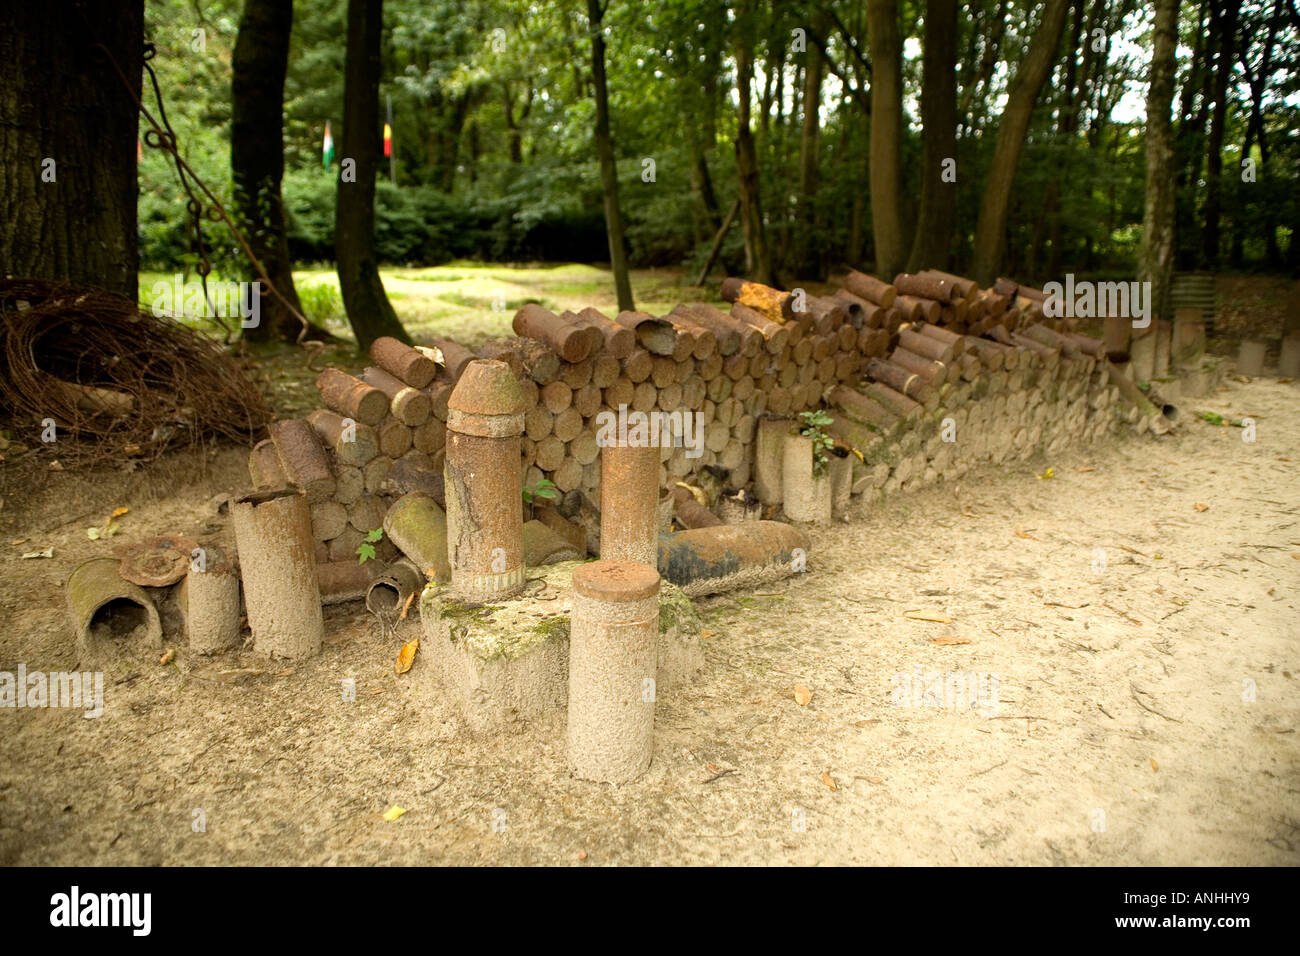 The Iron Harvest. Old shells and bombs that are still being found in the soil of WW1 battlefields. Sanctuary Wood near Ypres Stock Photo